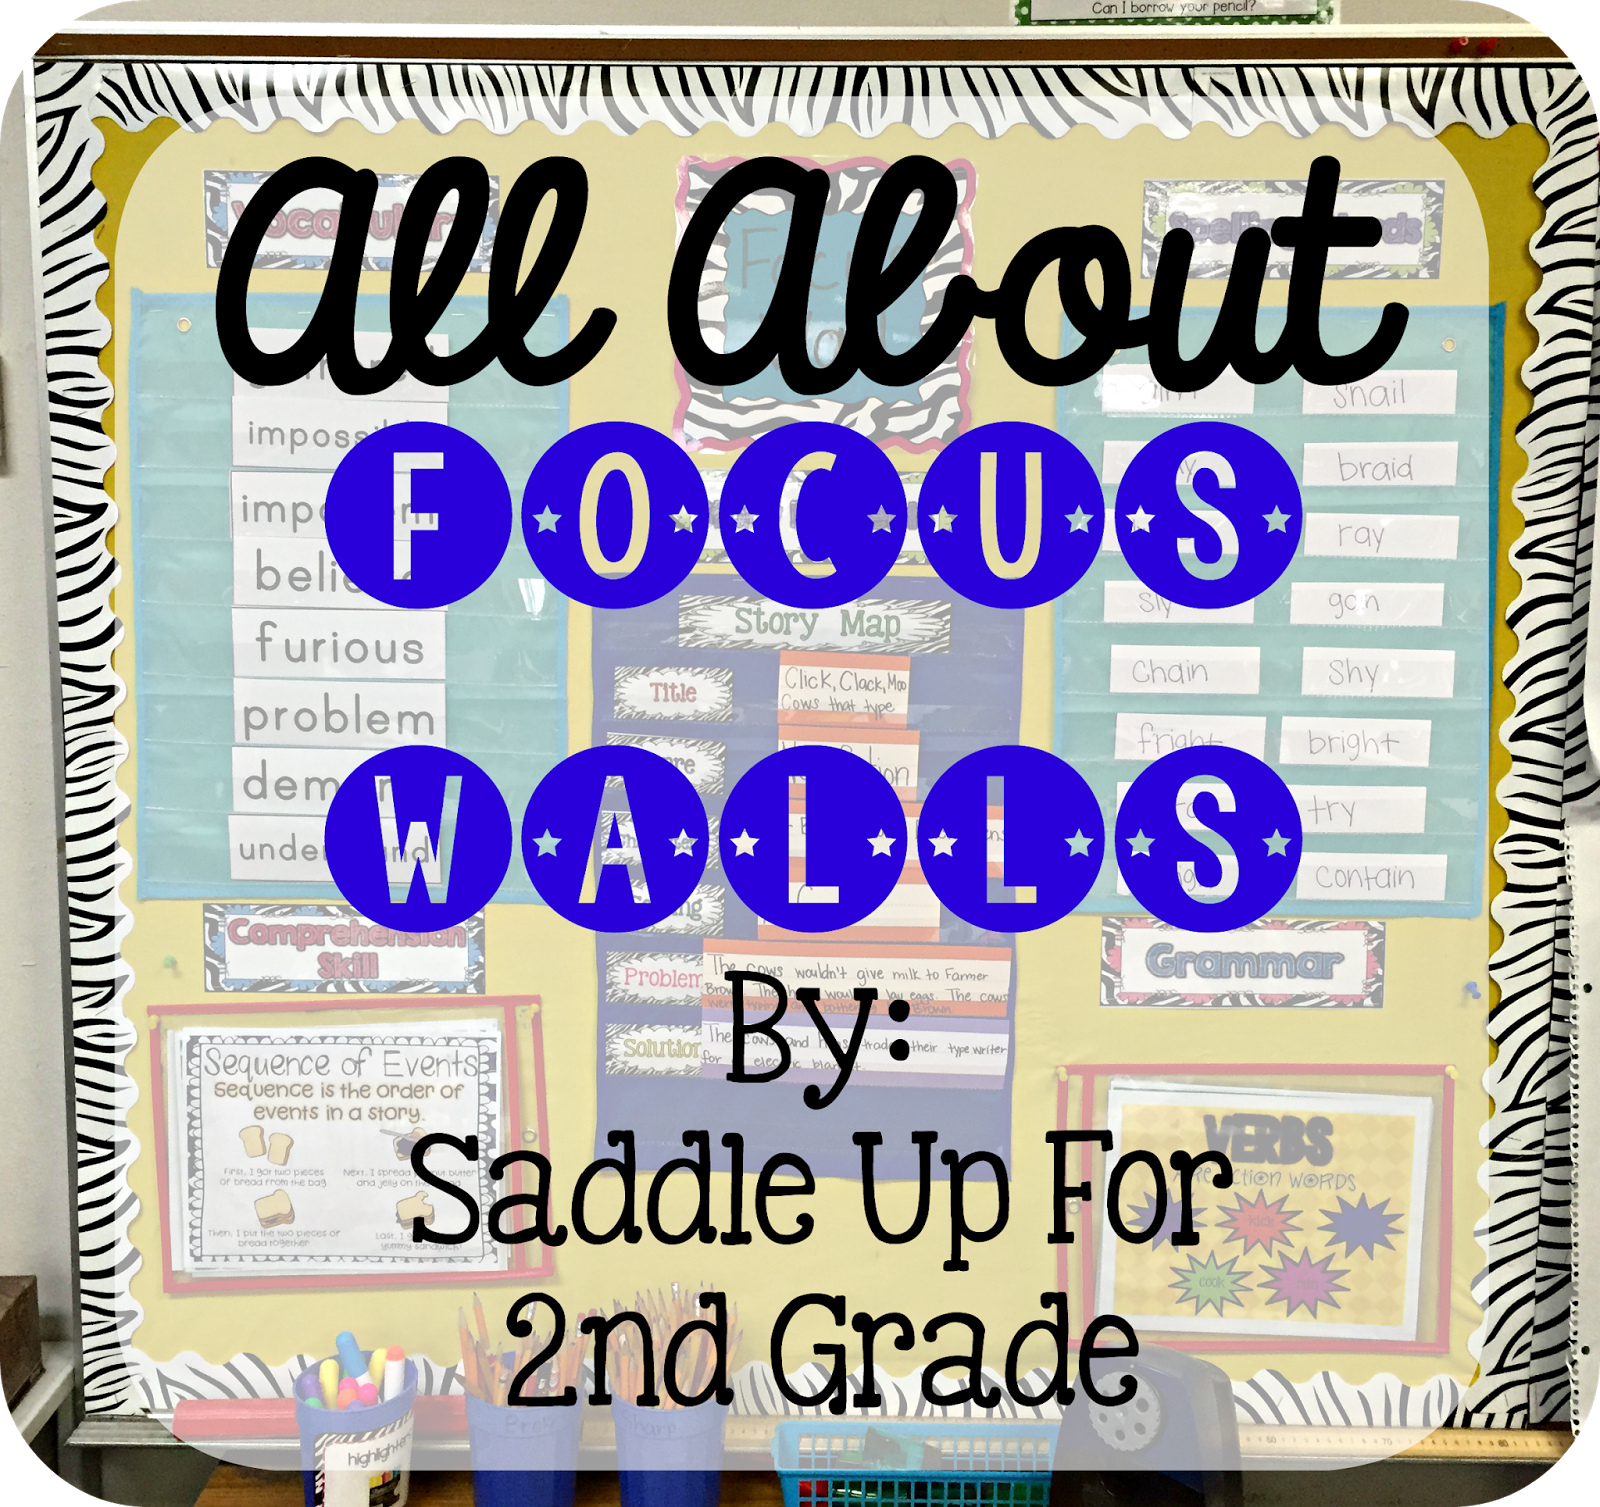 Focus Walls are a display to use in your classroom to show the skills you are currently focusing on. They are to be used as tools in your classroom. This blog post shares how to set them up and get started using them in your classroom. 